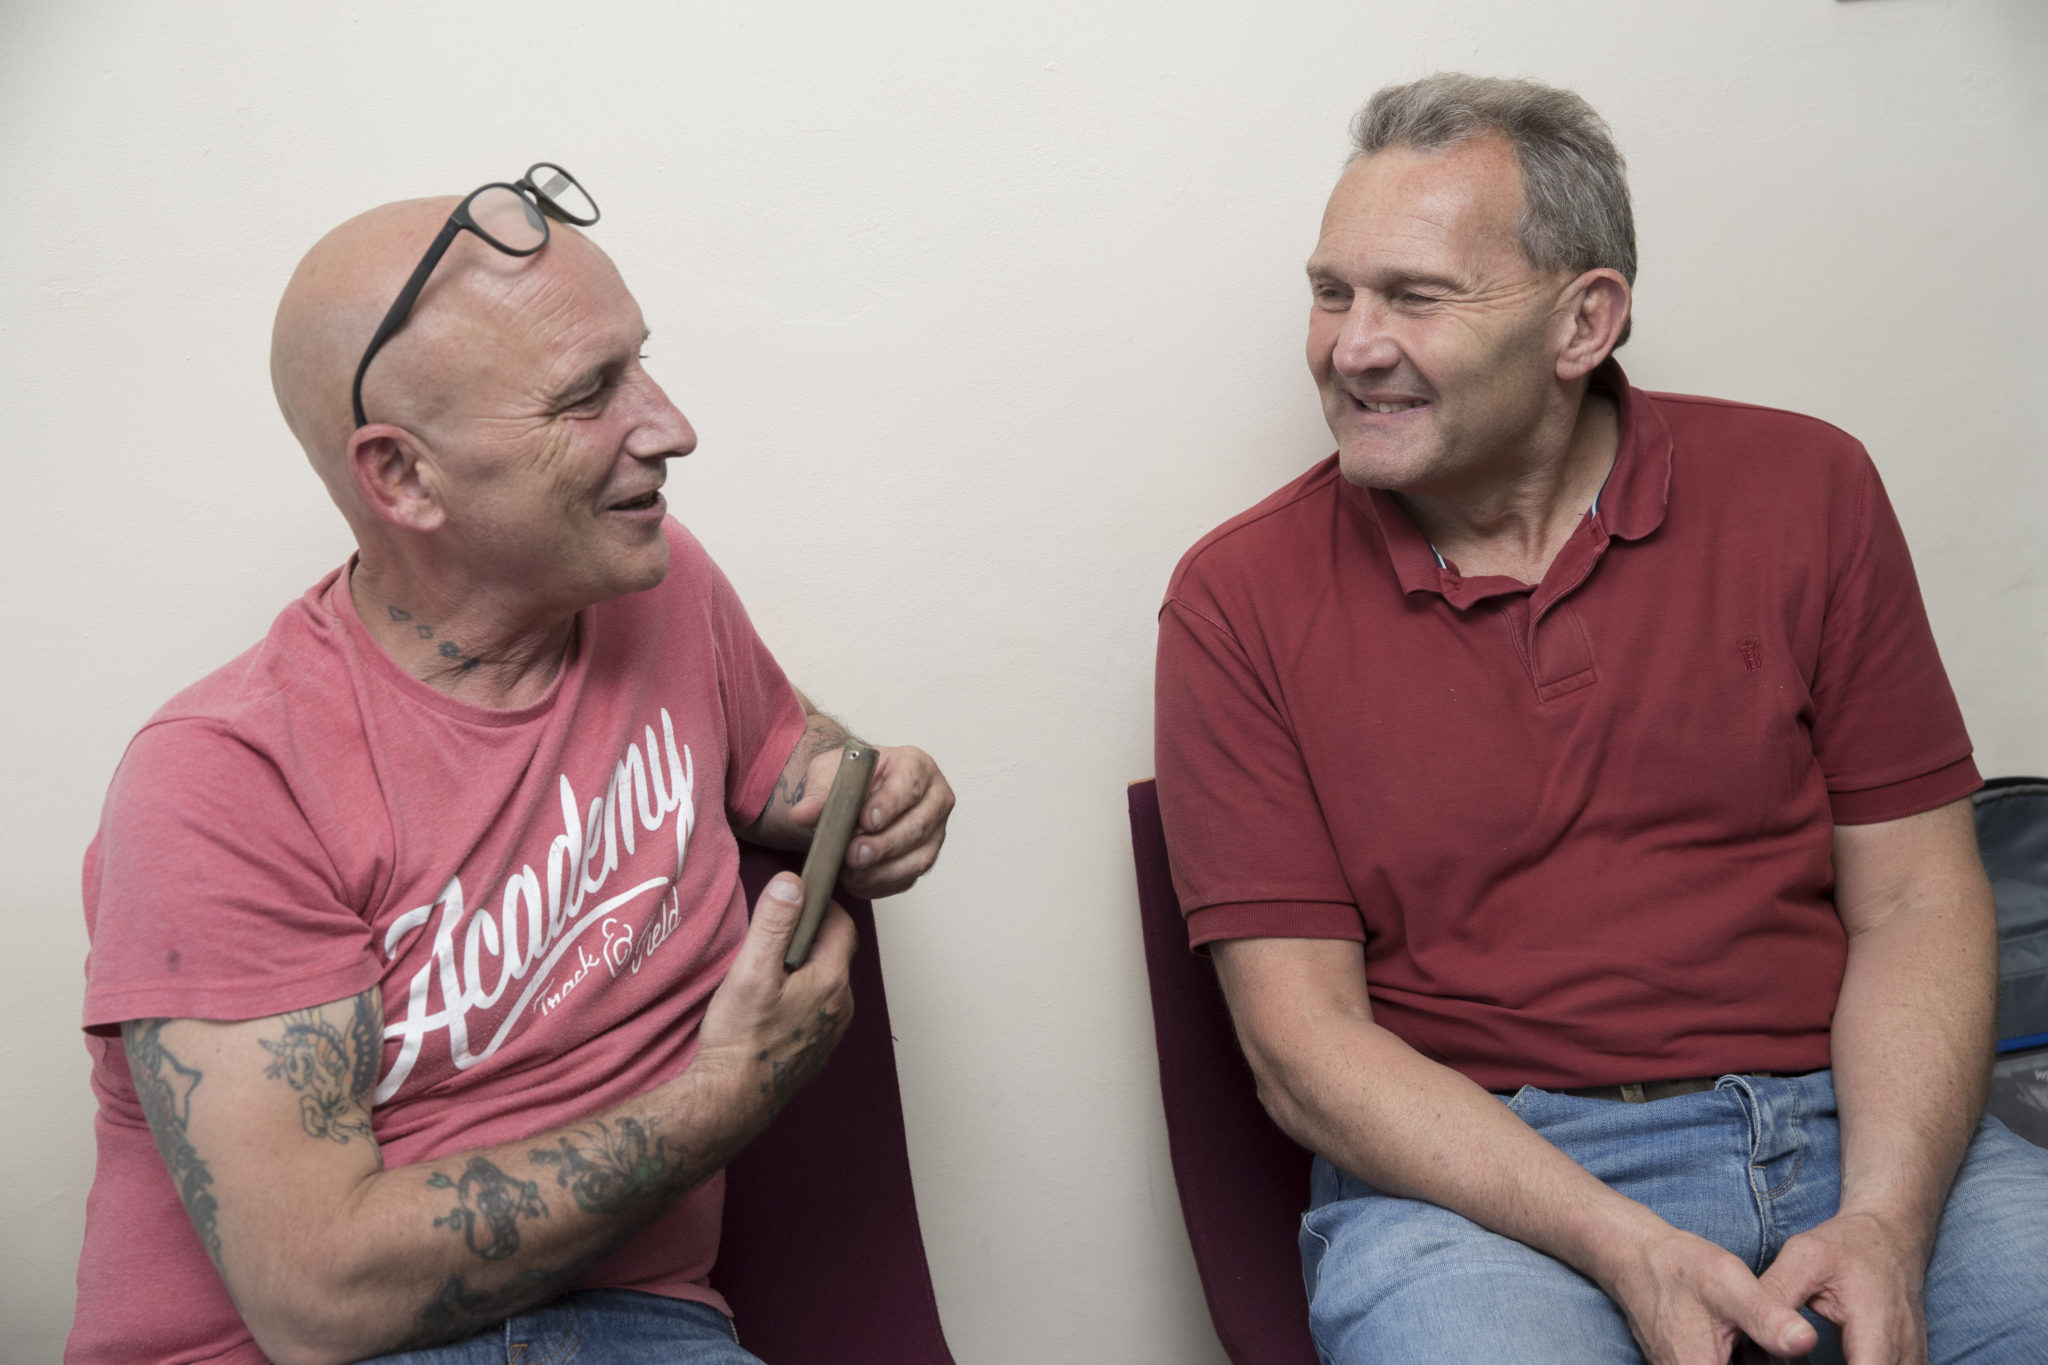 The Wallich Hostels and Accommodation for Homeless People